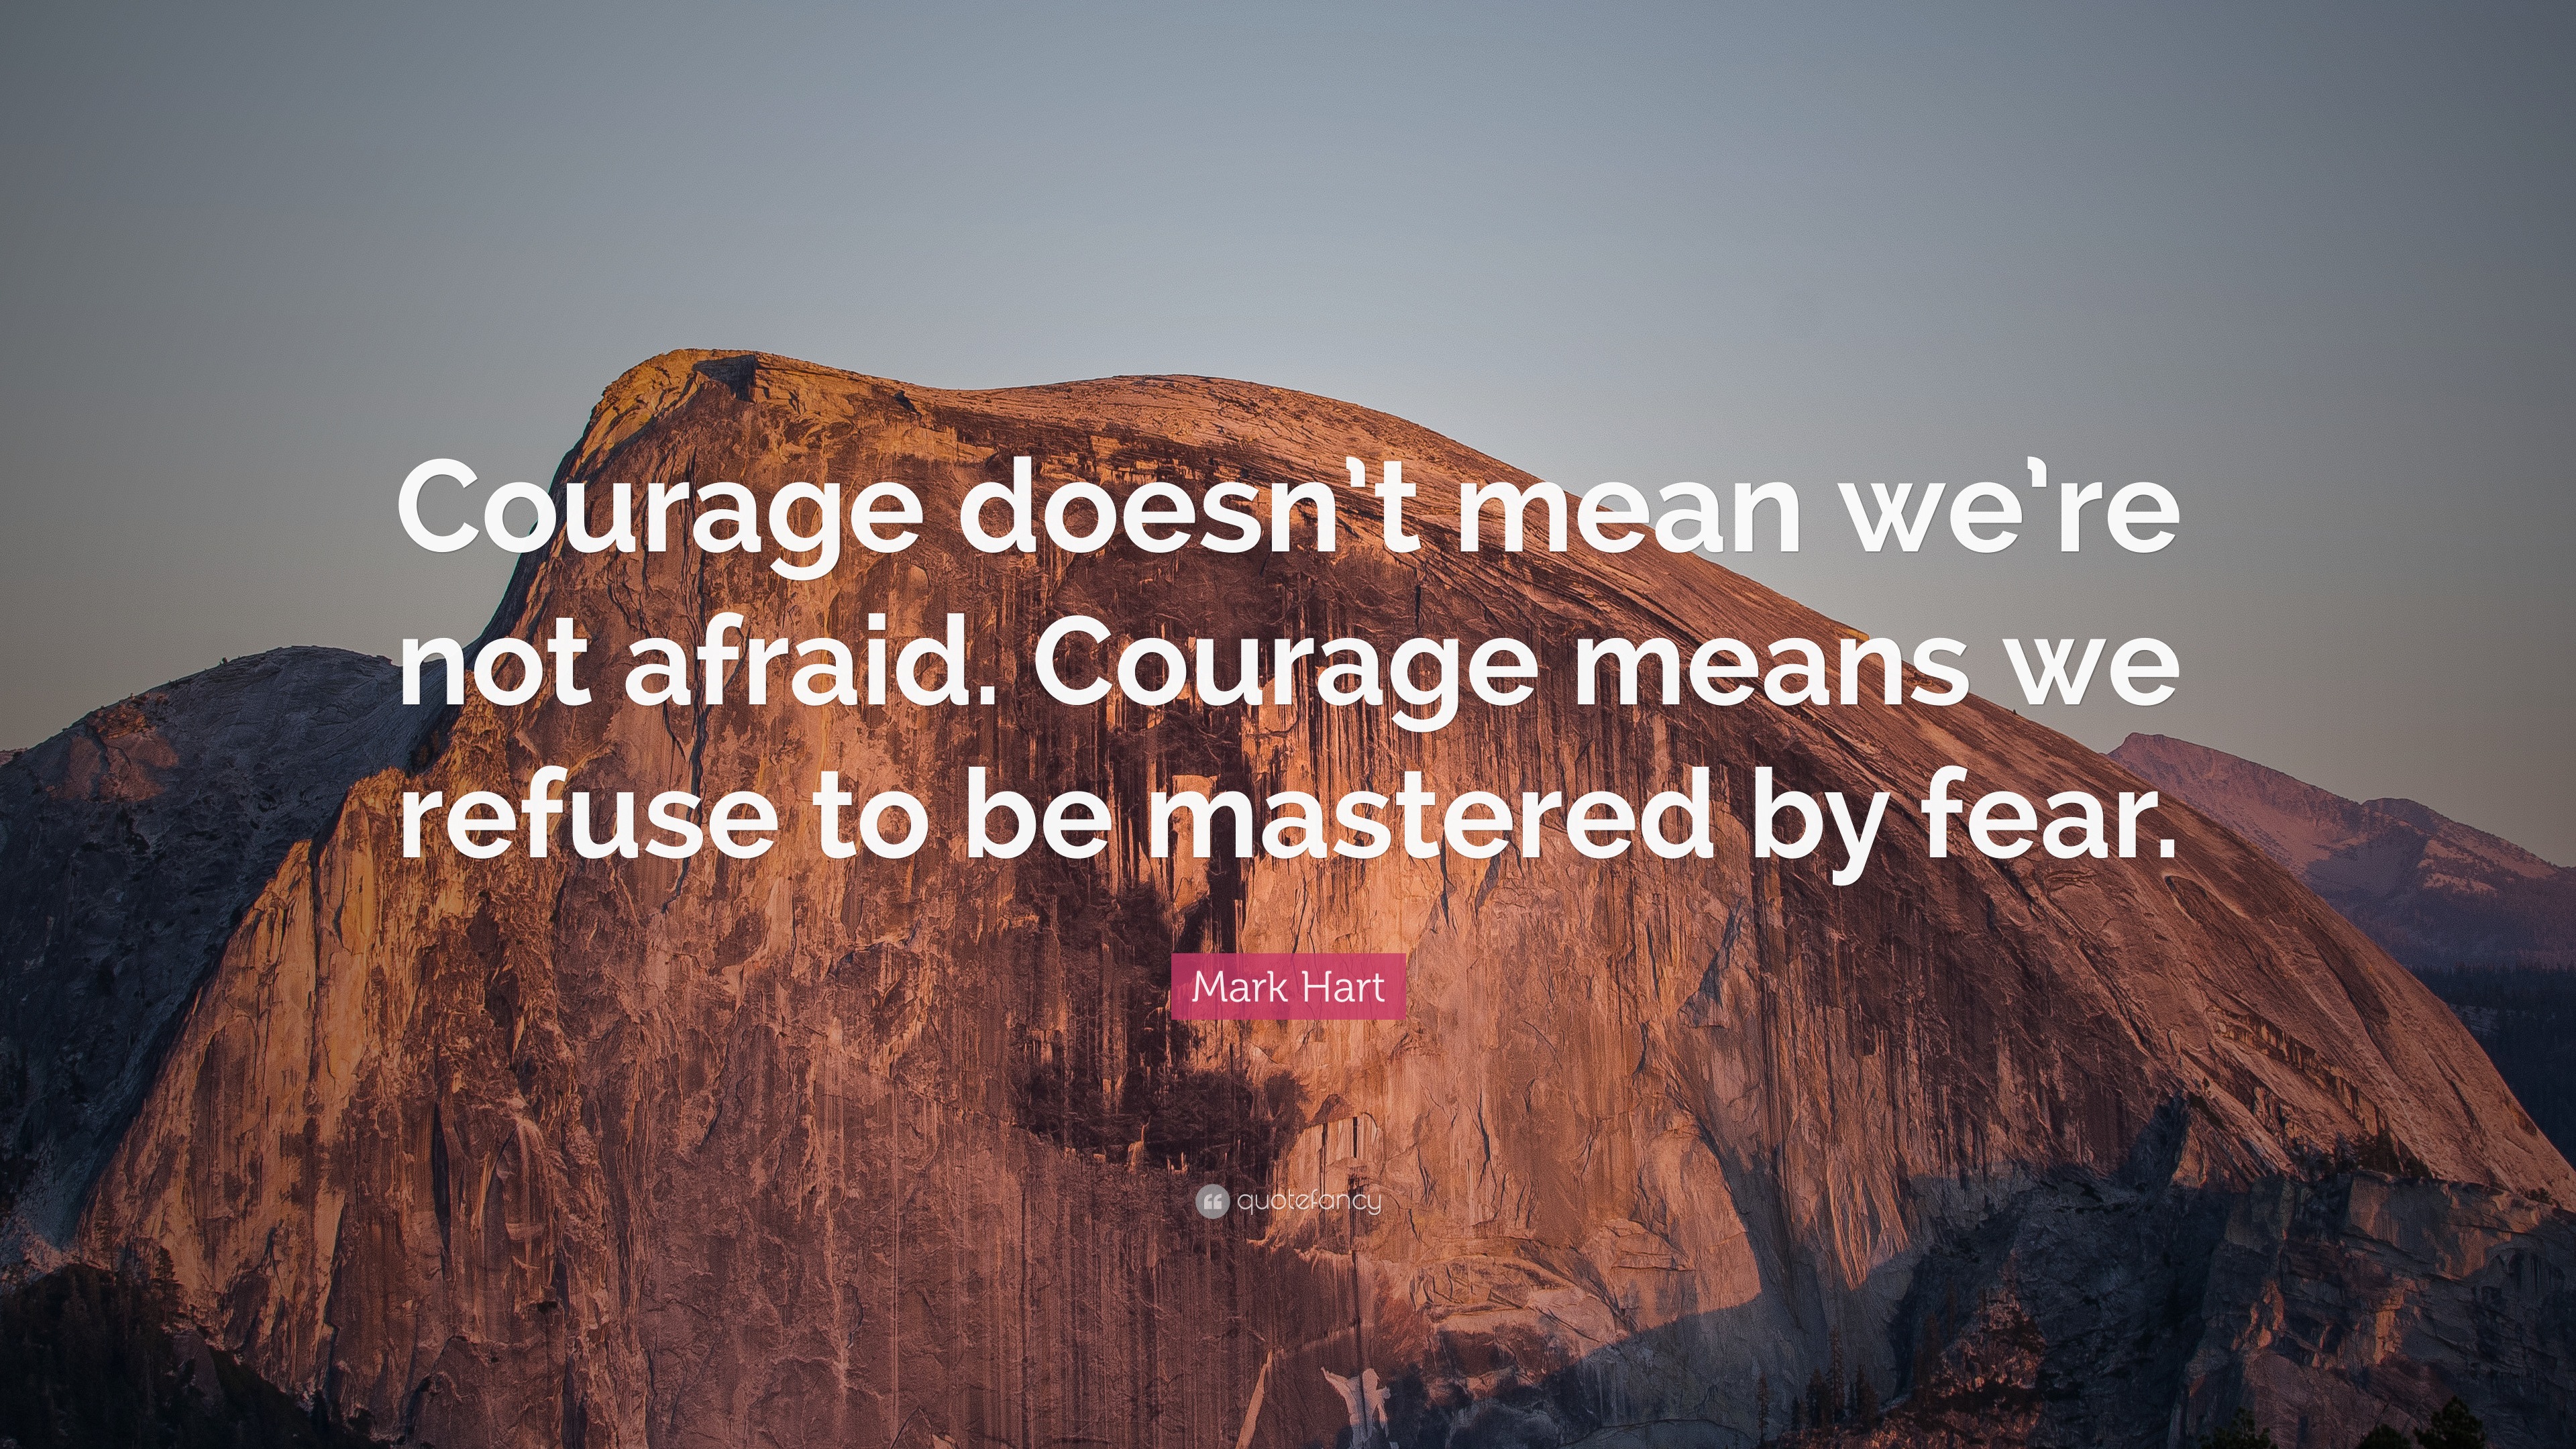 Mark Hart Quote: “Courage doesn’t mean we’re not afraid. Courage means ...